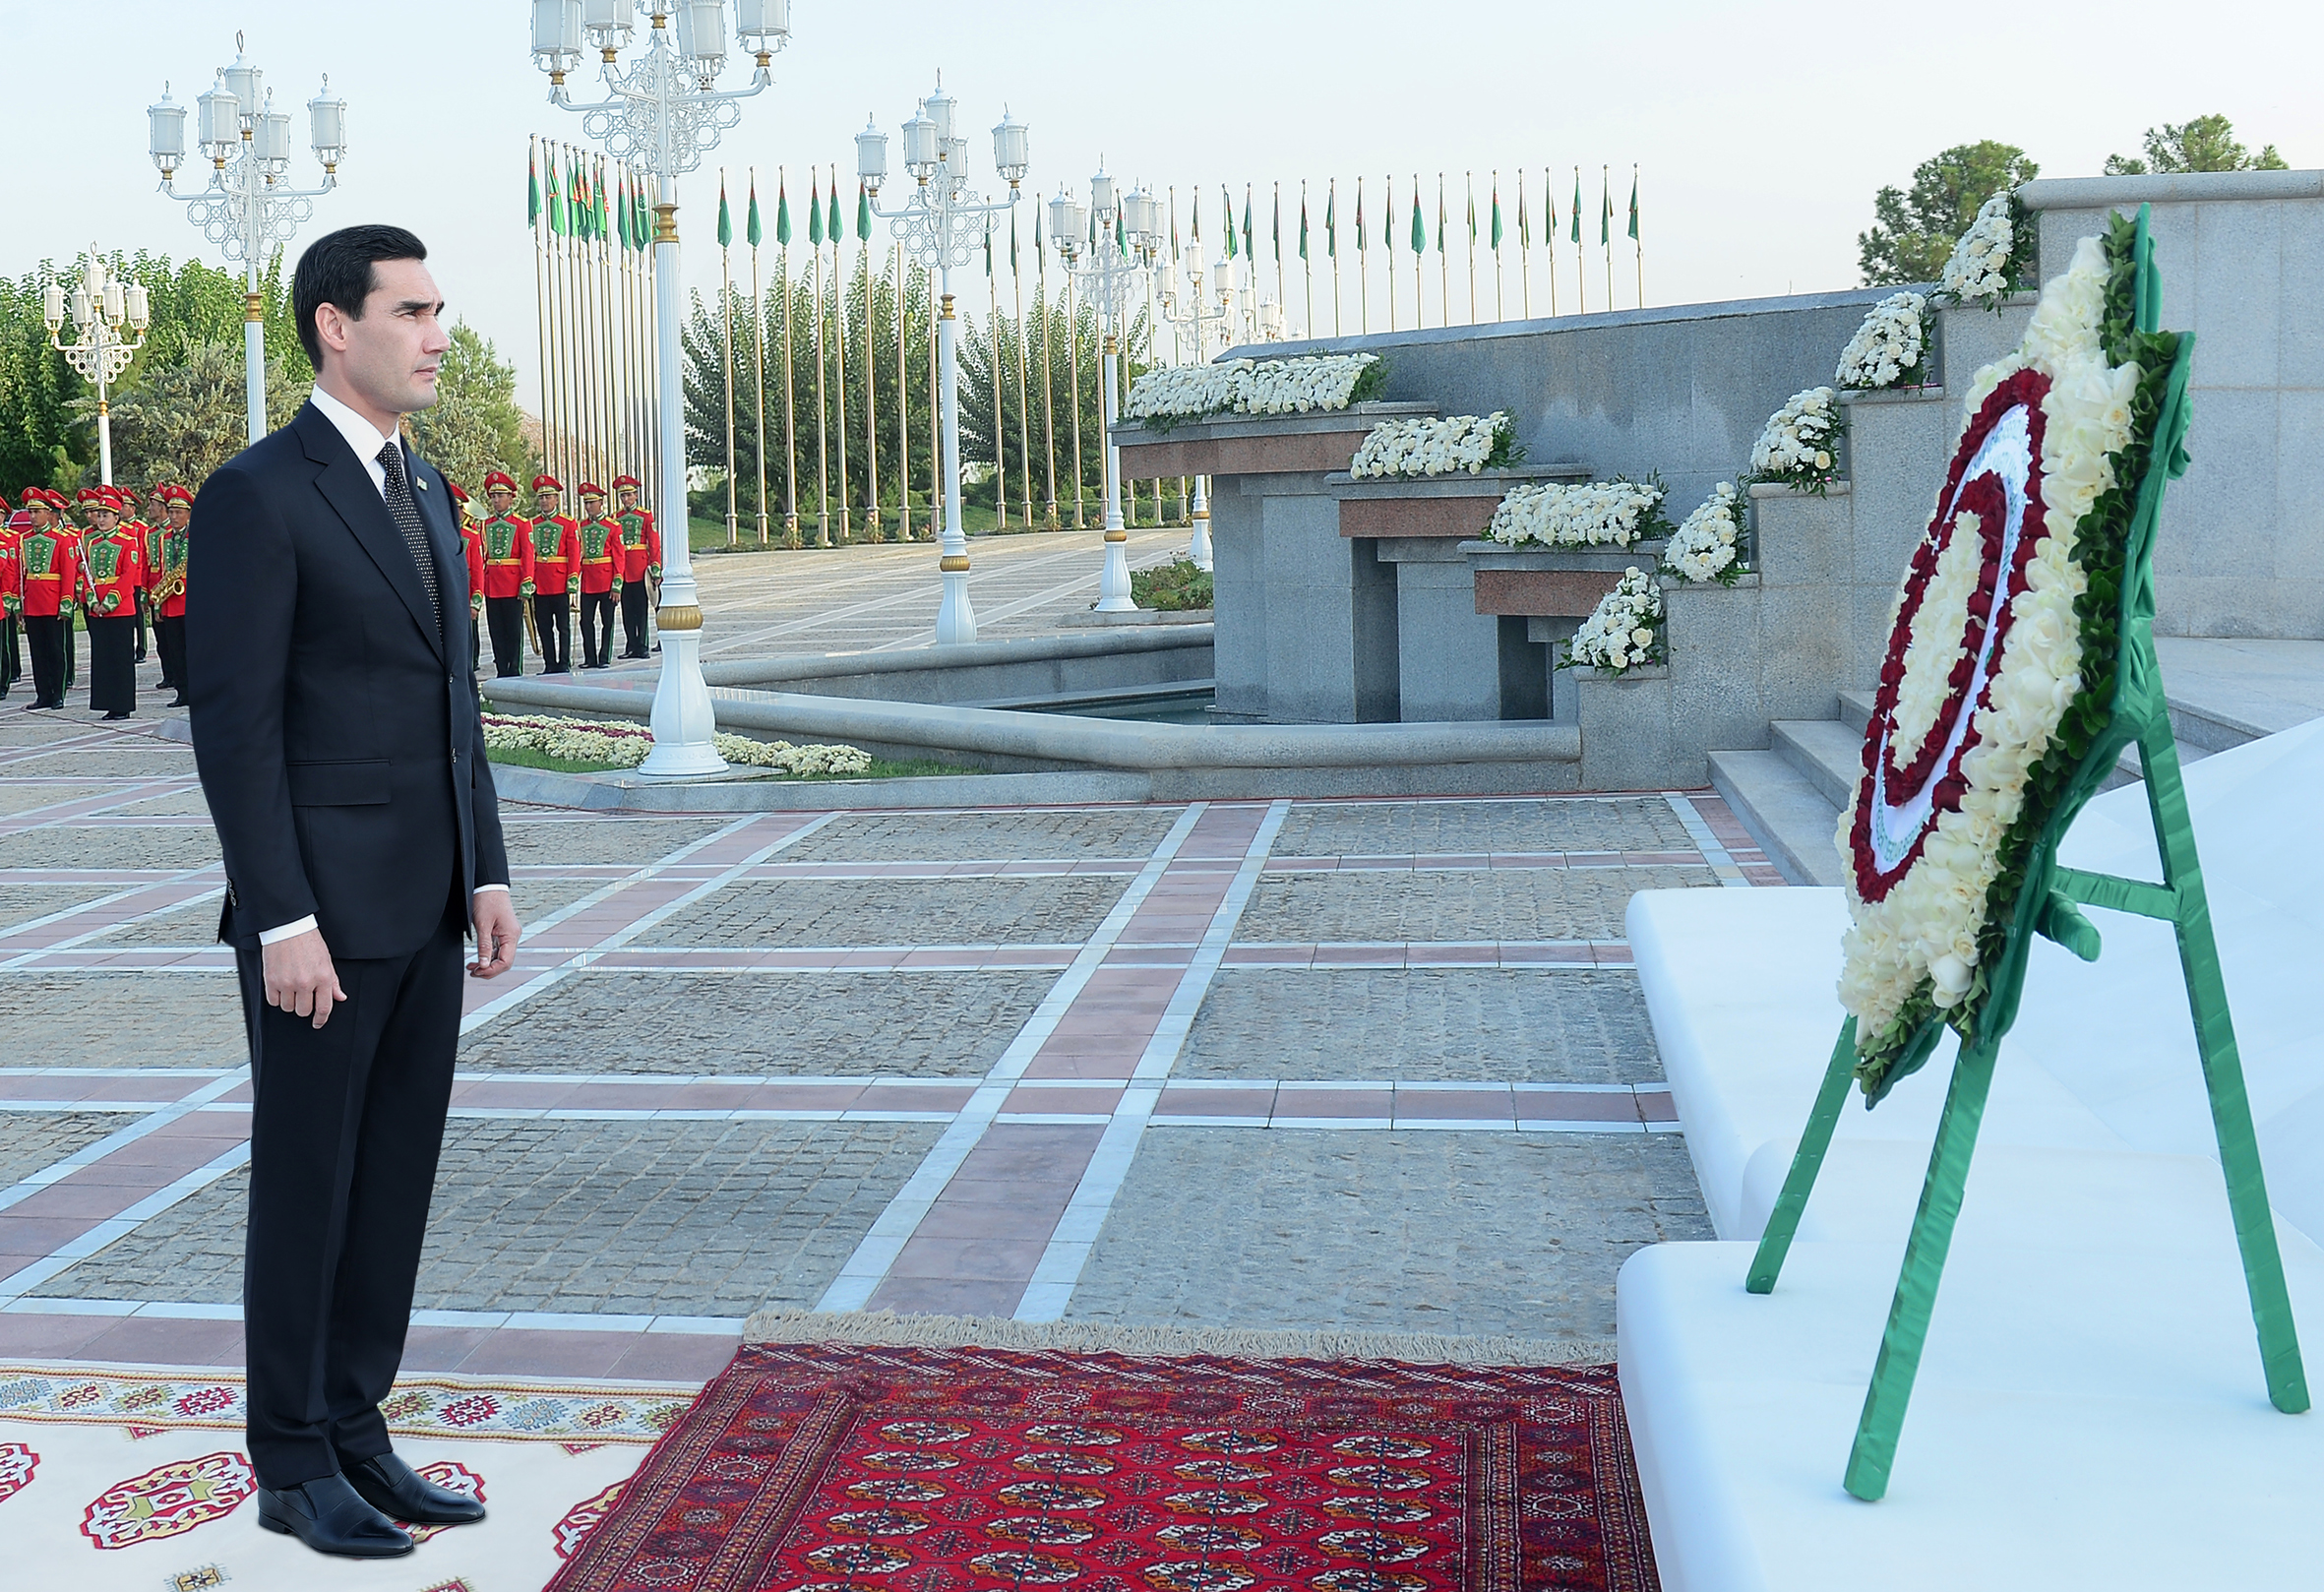 The President of Turkmenistan took part in the flower-laying ceremony at the Independence Monument